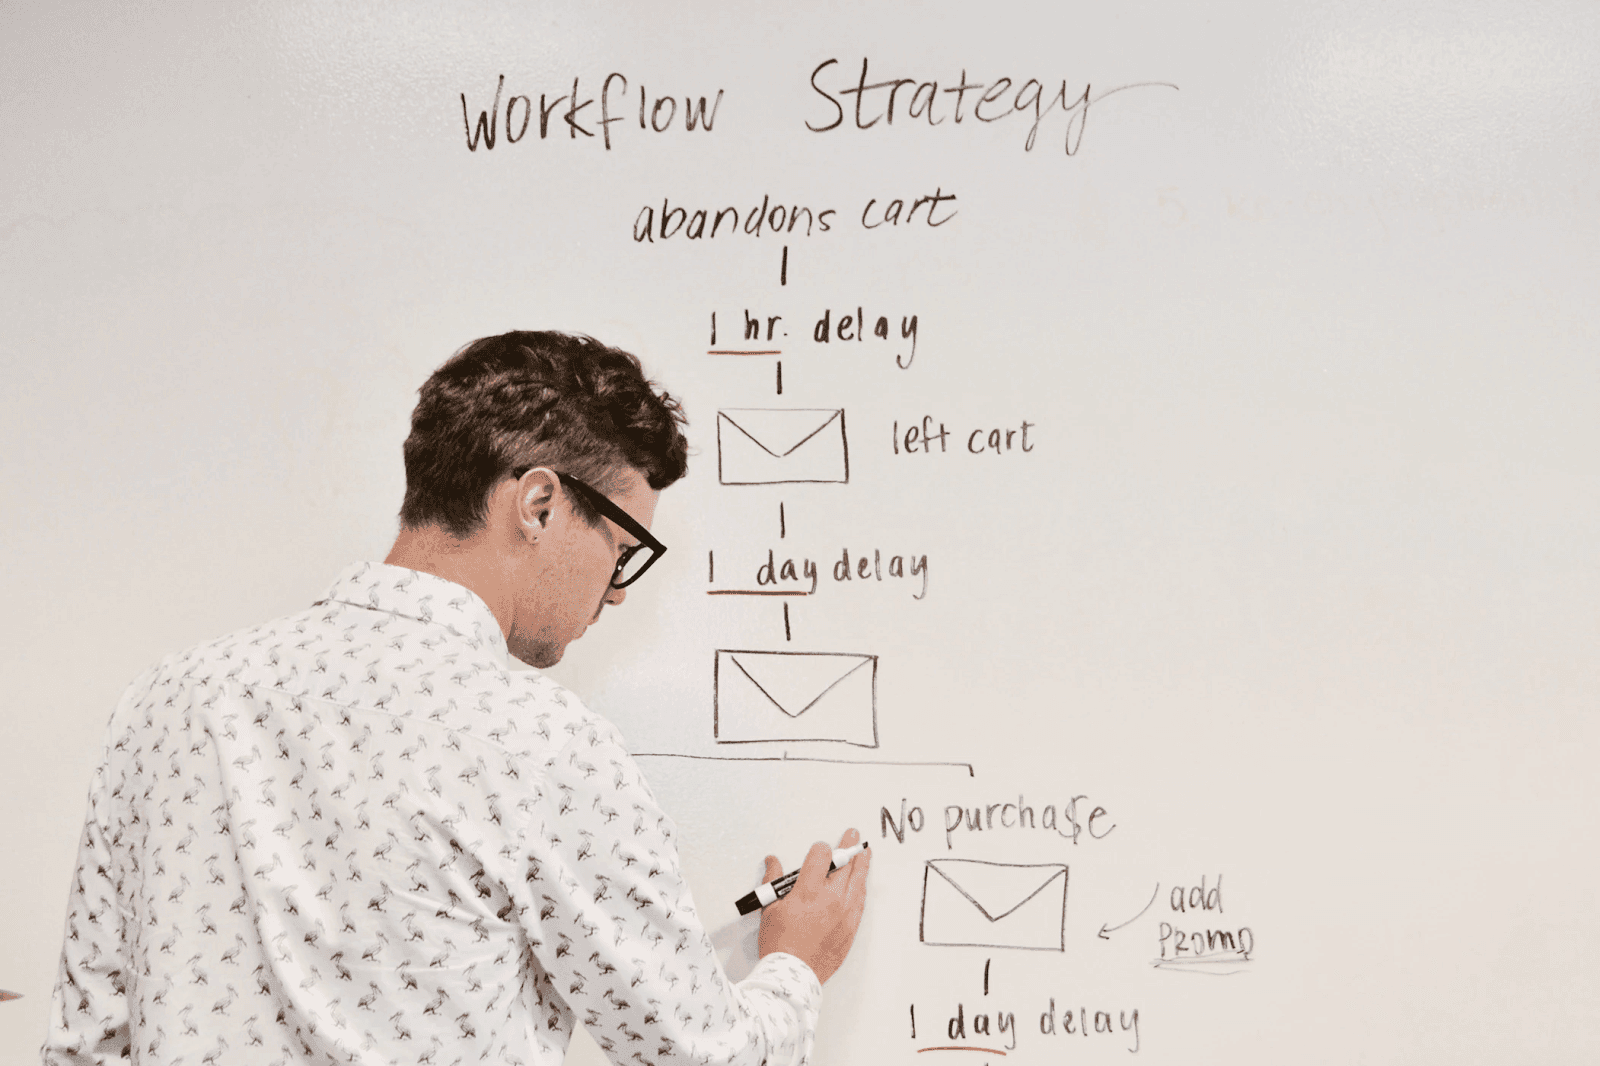 Man writing out a workflow strategy on a whiteboard